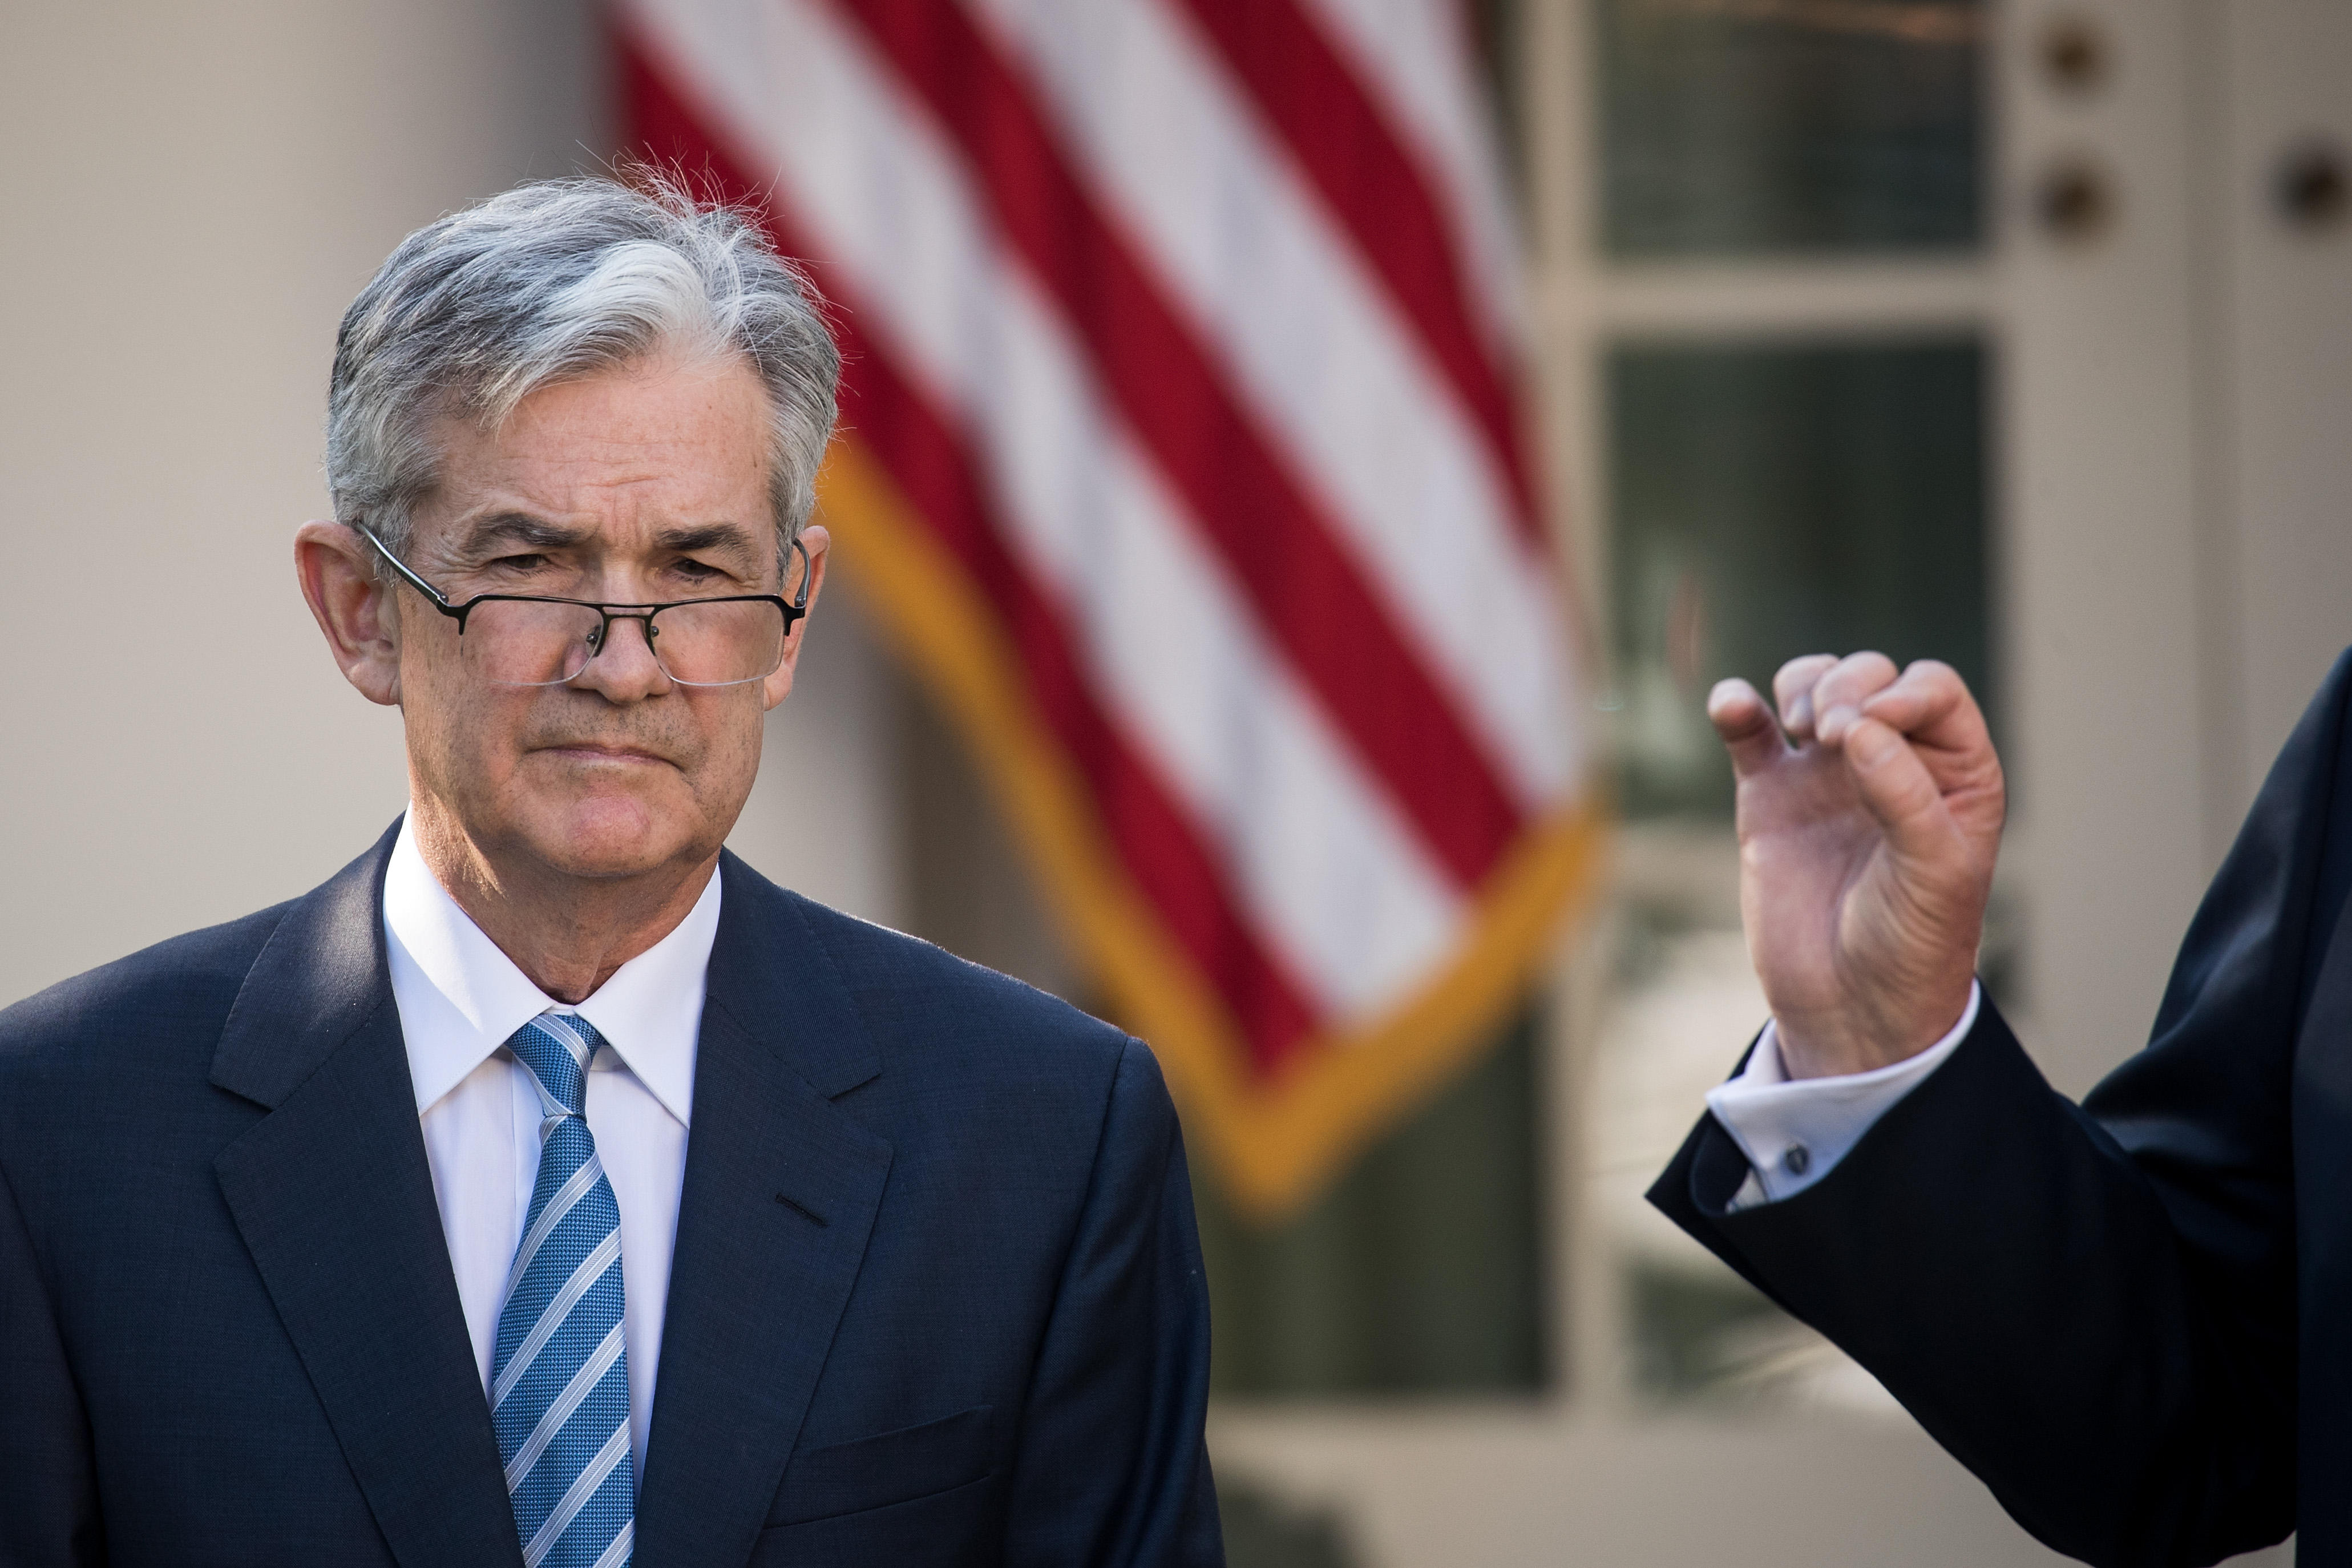 Jerome Powell: Next interest rate hike “coming together” - CBS News